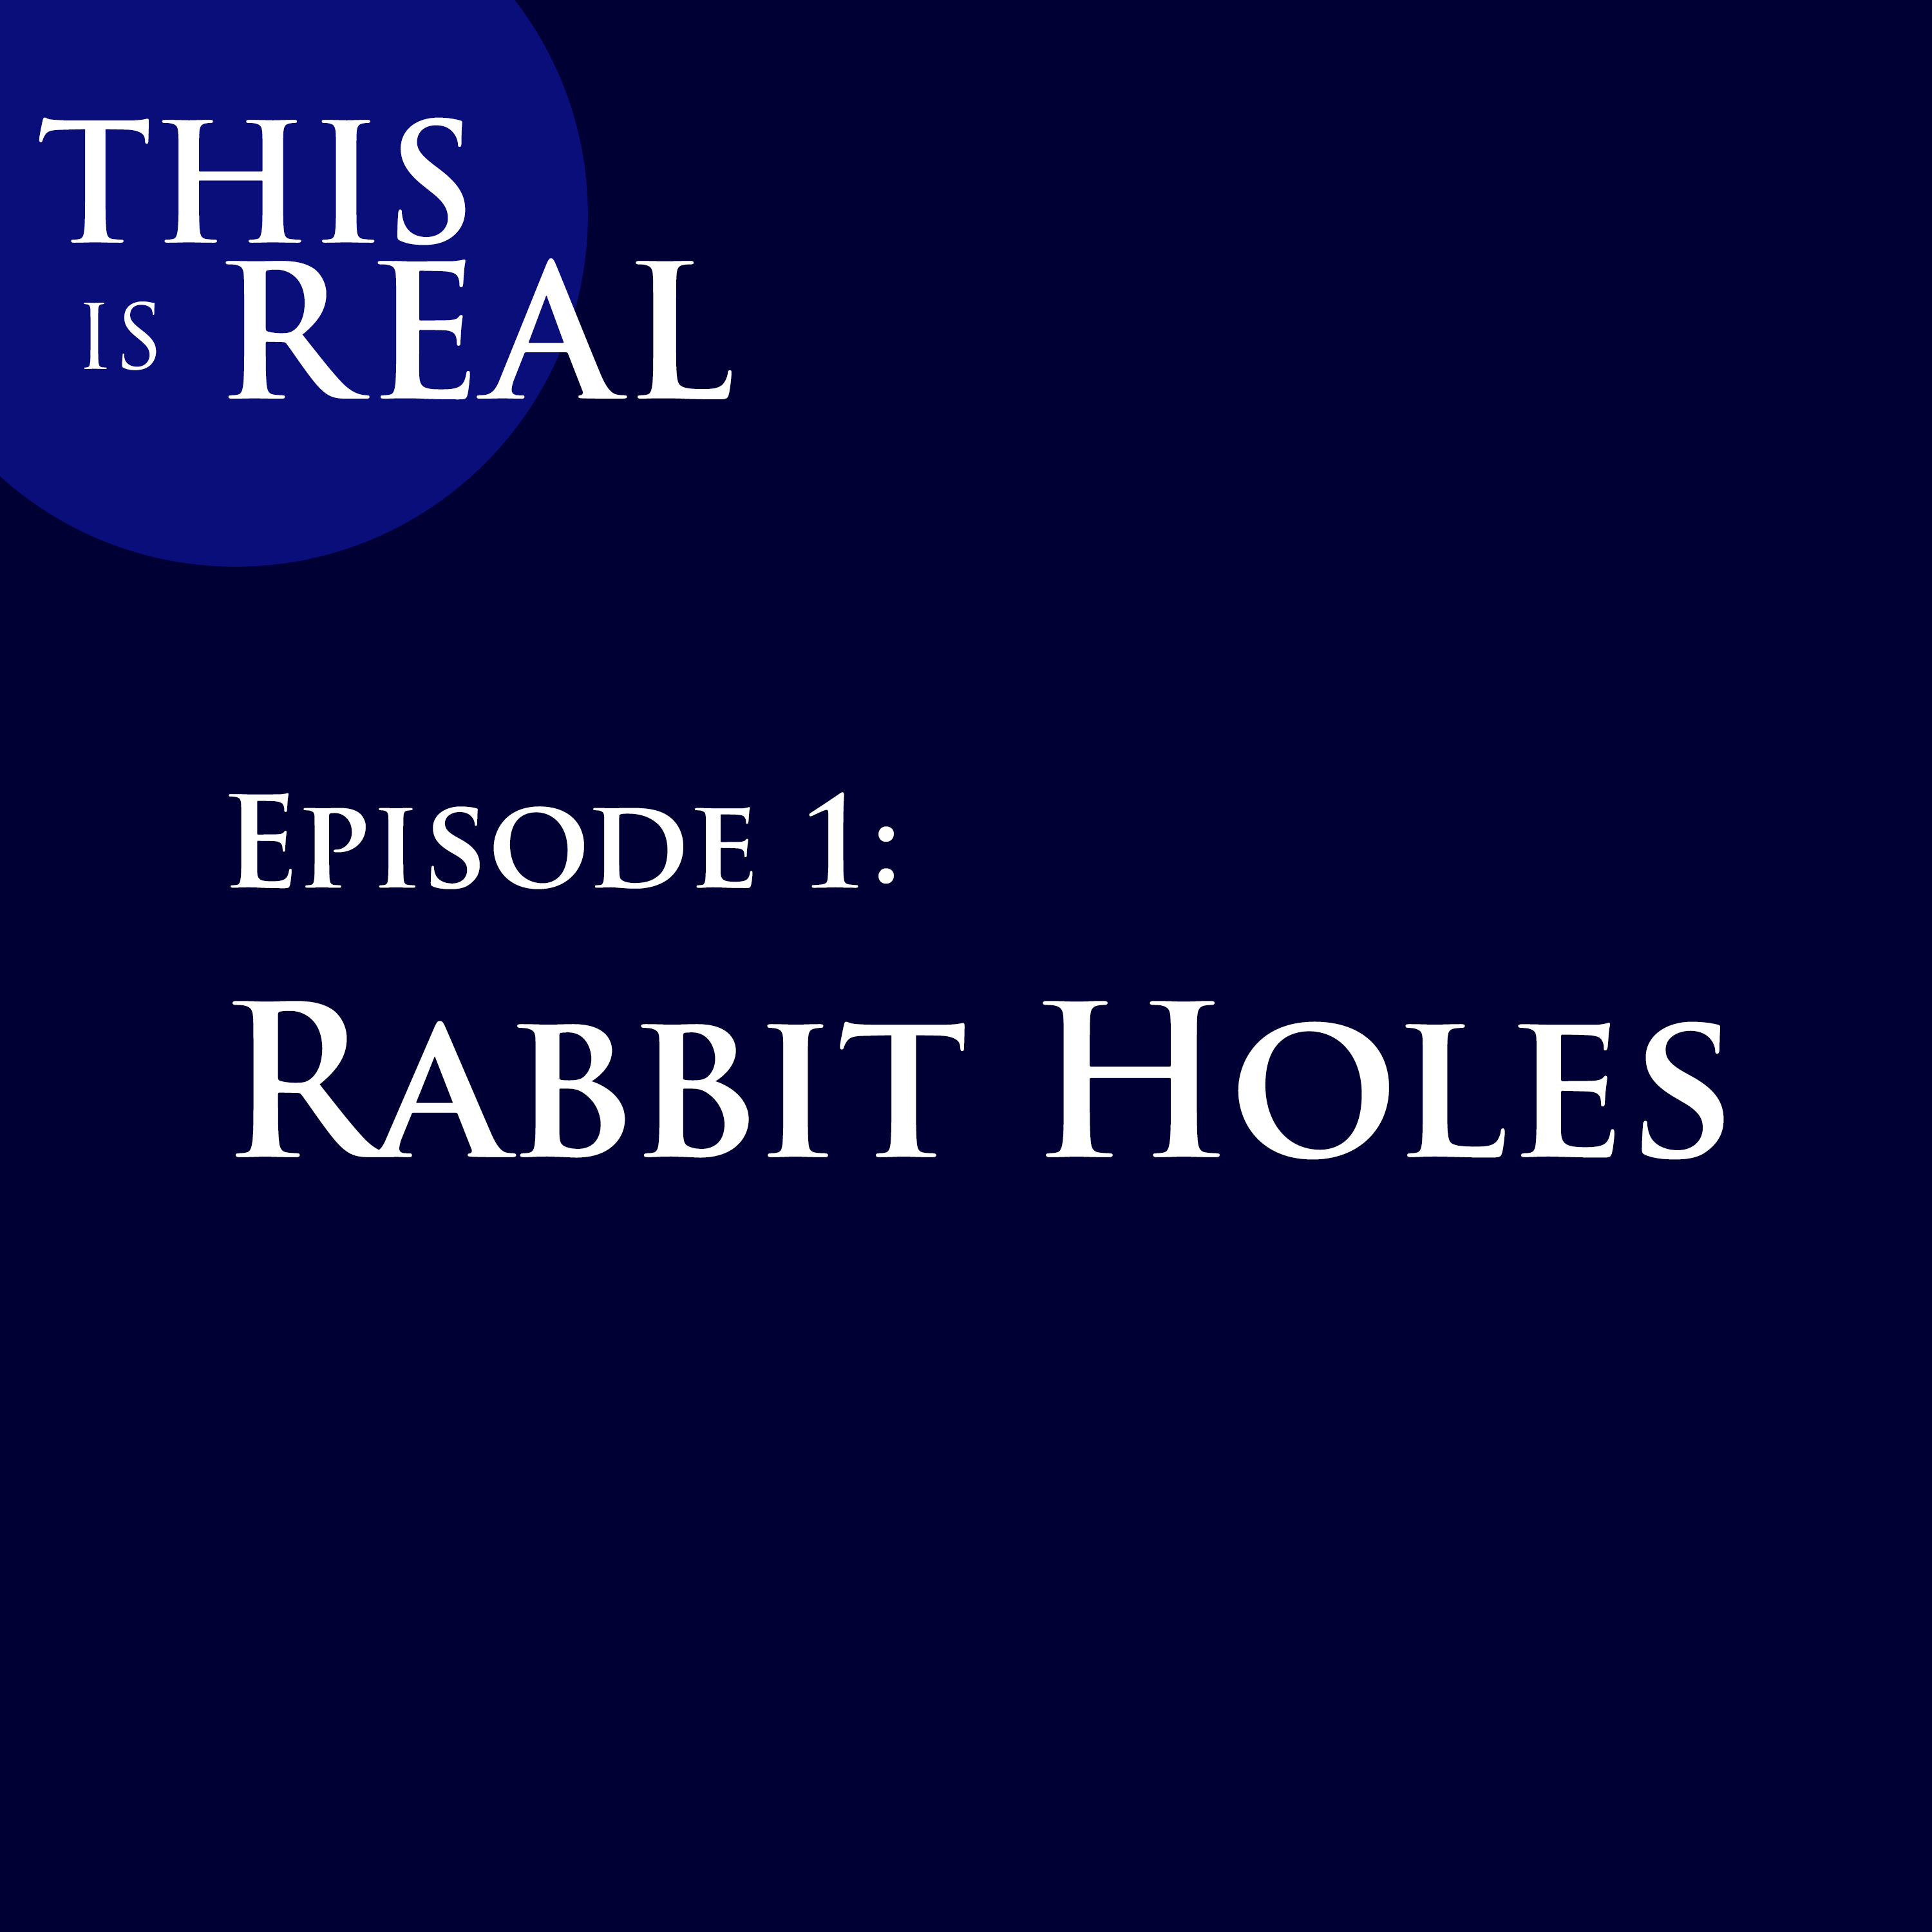 This is Real Episode 1: Rabbit Holes